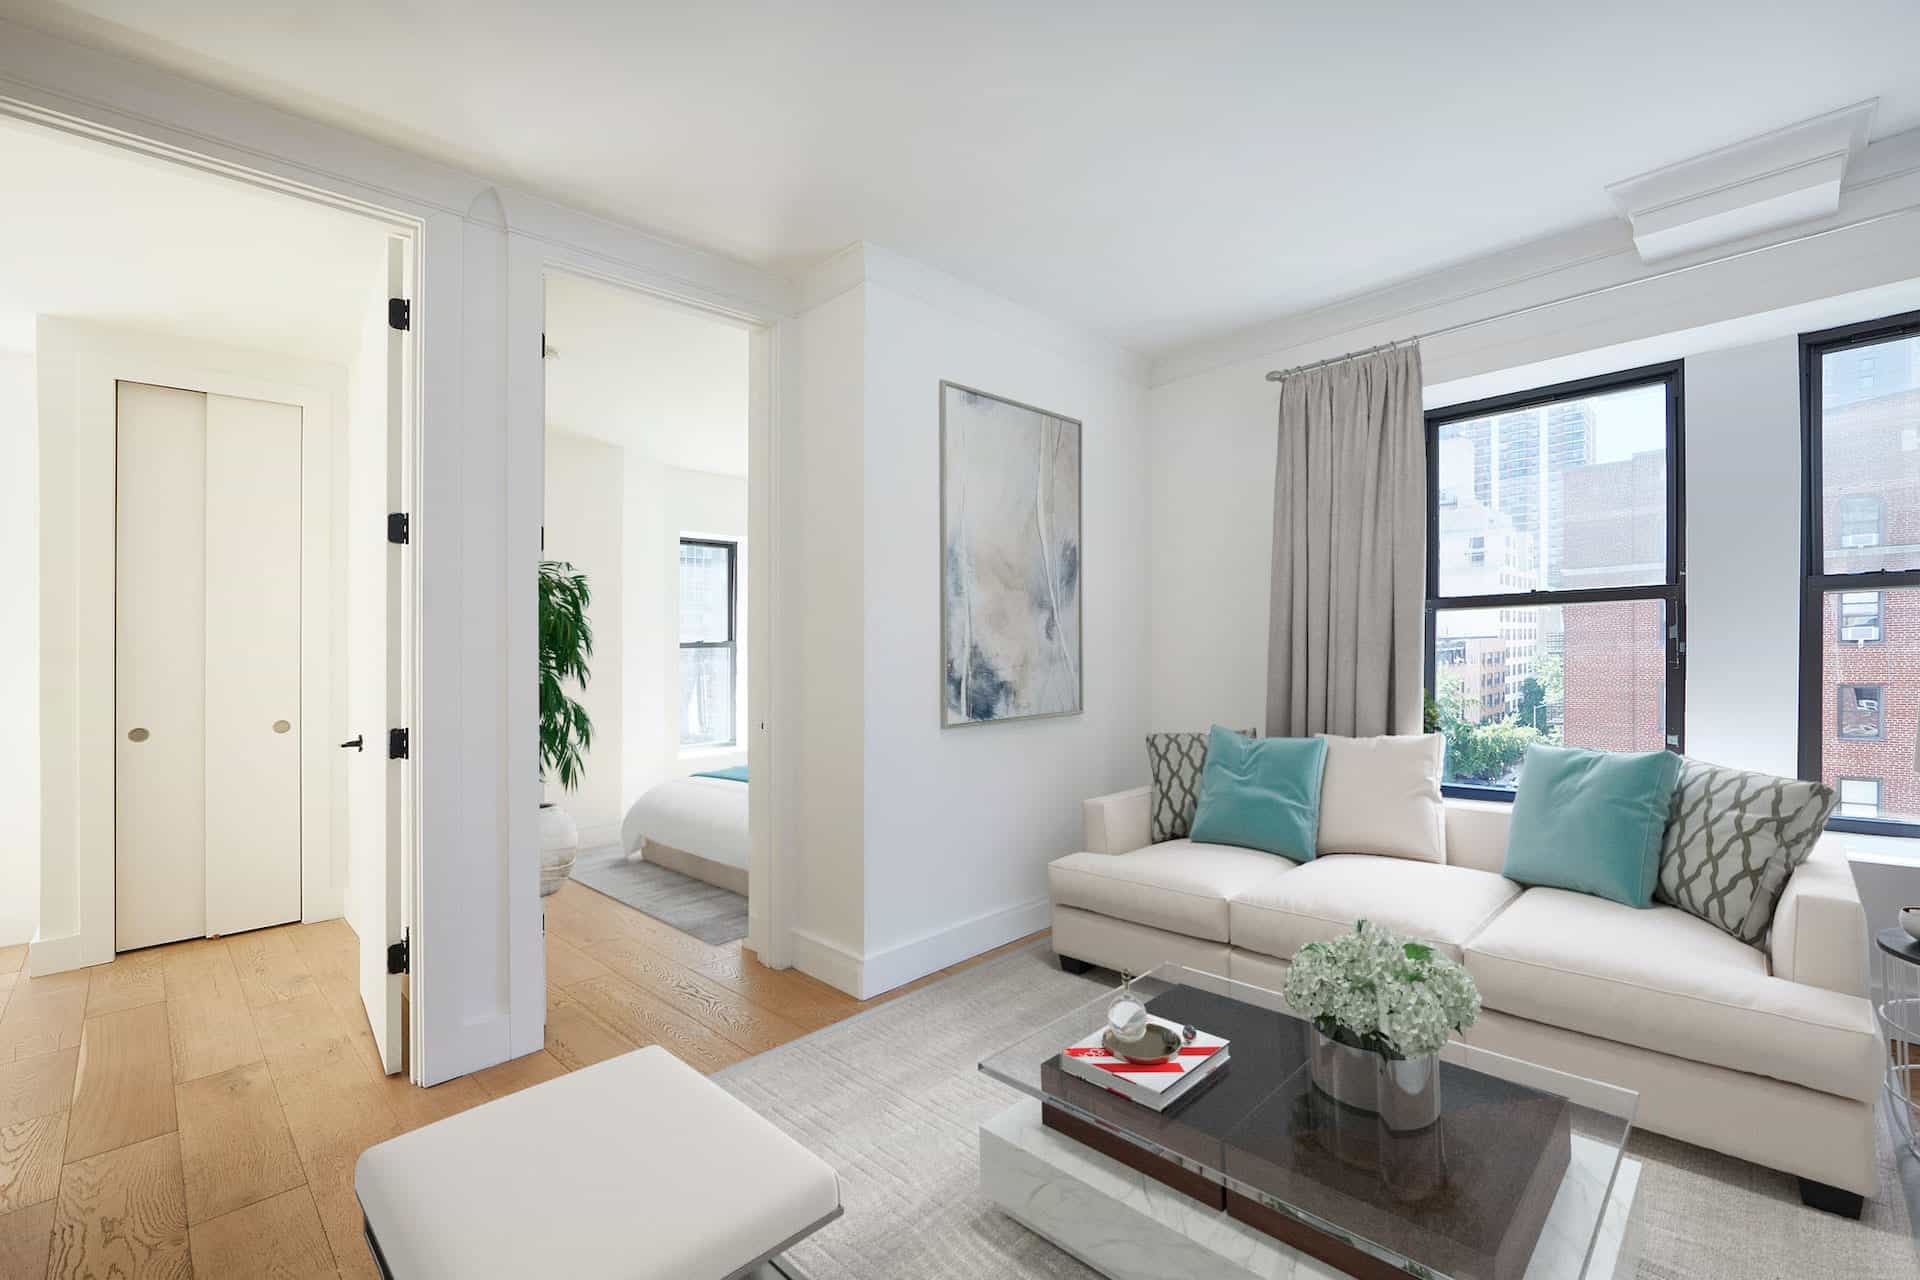 Living room at 401 East 50th Street apartments in Midtown East with two windows, hardwood floors, and living room furniture.